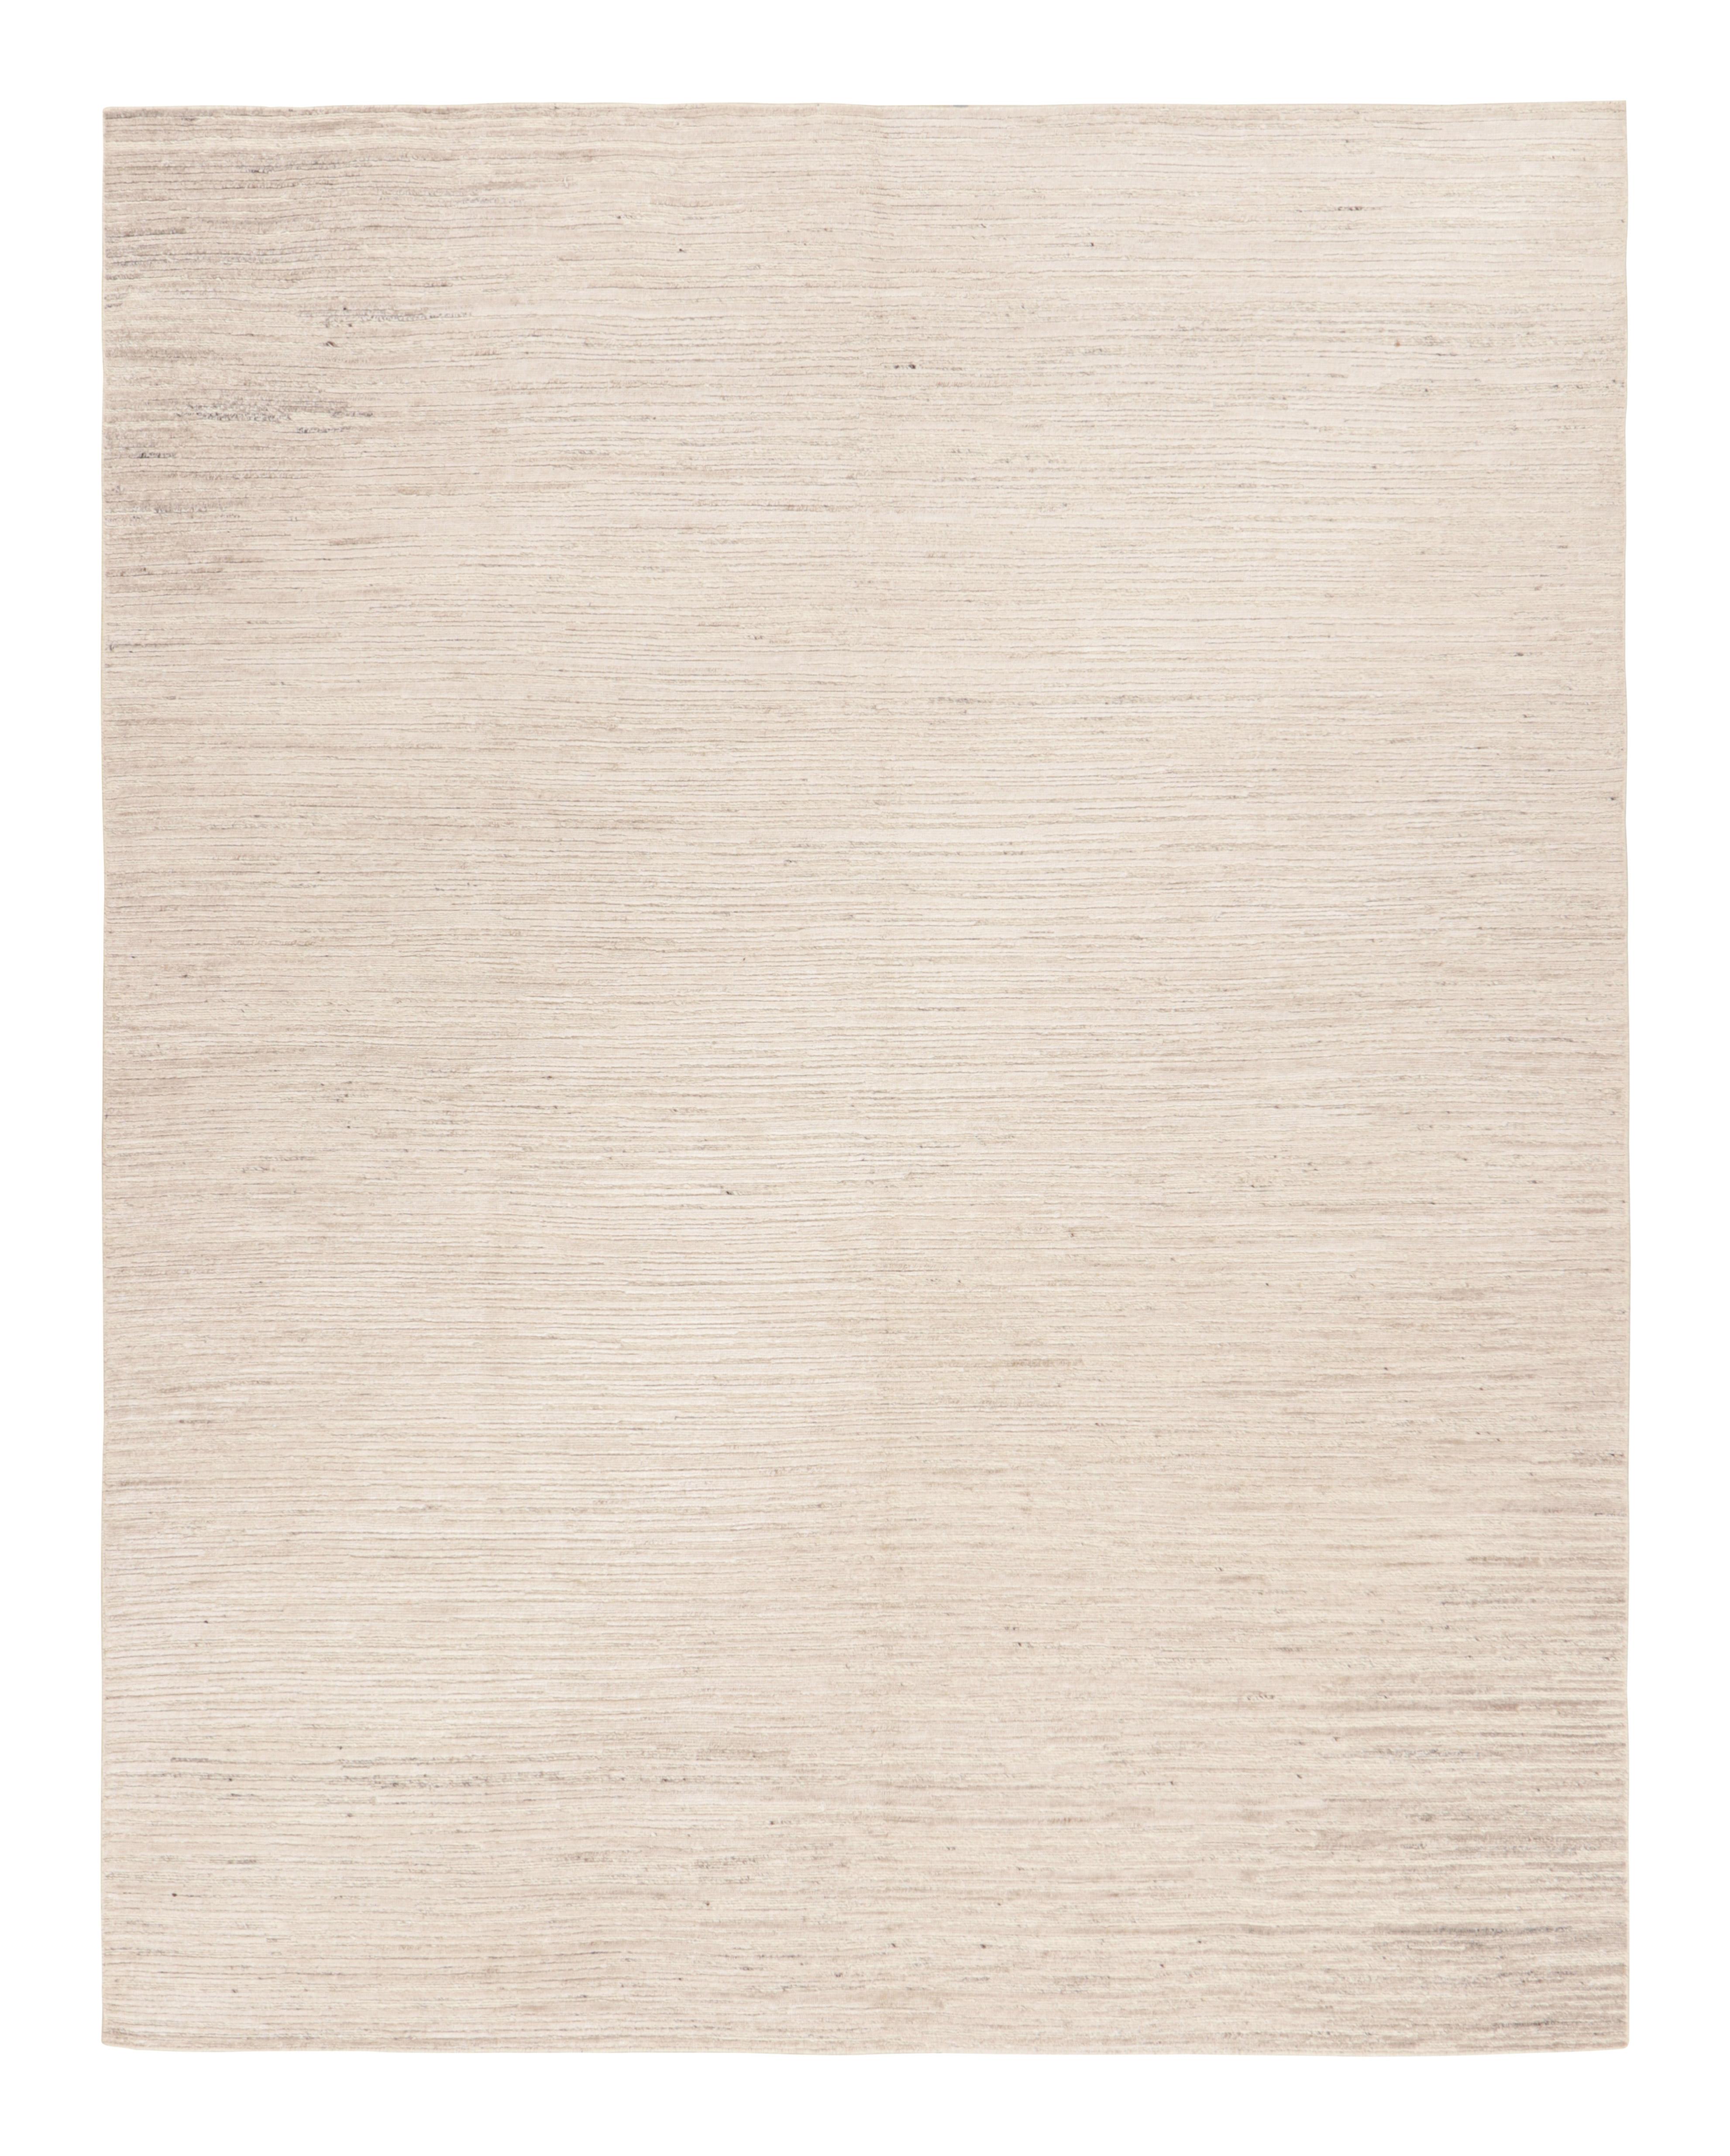 Handwoven in wool, this 8x10 rug represents an exciting new design in the Textural rug collection by Rug & Kilim. 

On the Design: 

Cream white and beige tones underscore a subtle play of high-low texture, married to abstract stripes in a take on